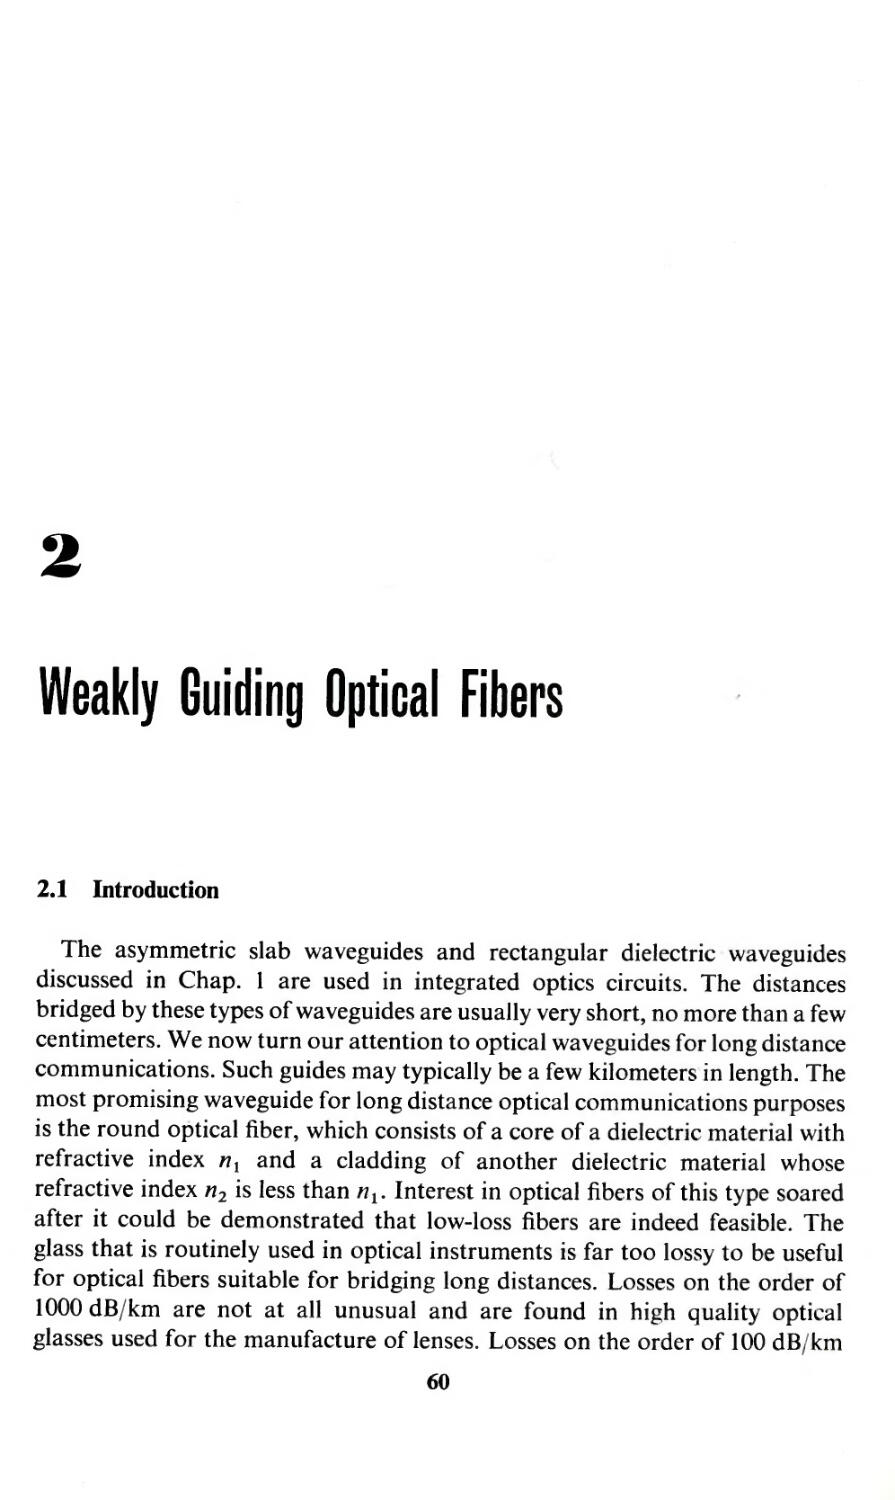 Chapter 2. Weakly Guiding Optical Fibers
Fiber modes guided, 60-77
Optical fiber, 60
Optical waveguide, 60
Round optical fiber, 60
--- optical, 60
Weakly guiding fiber, 60